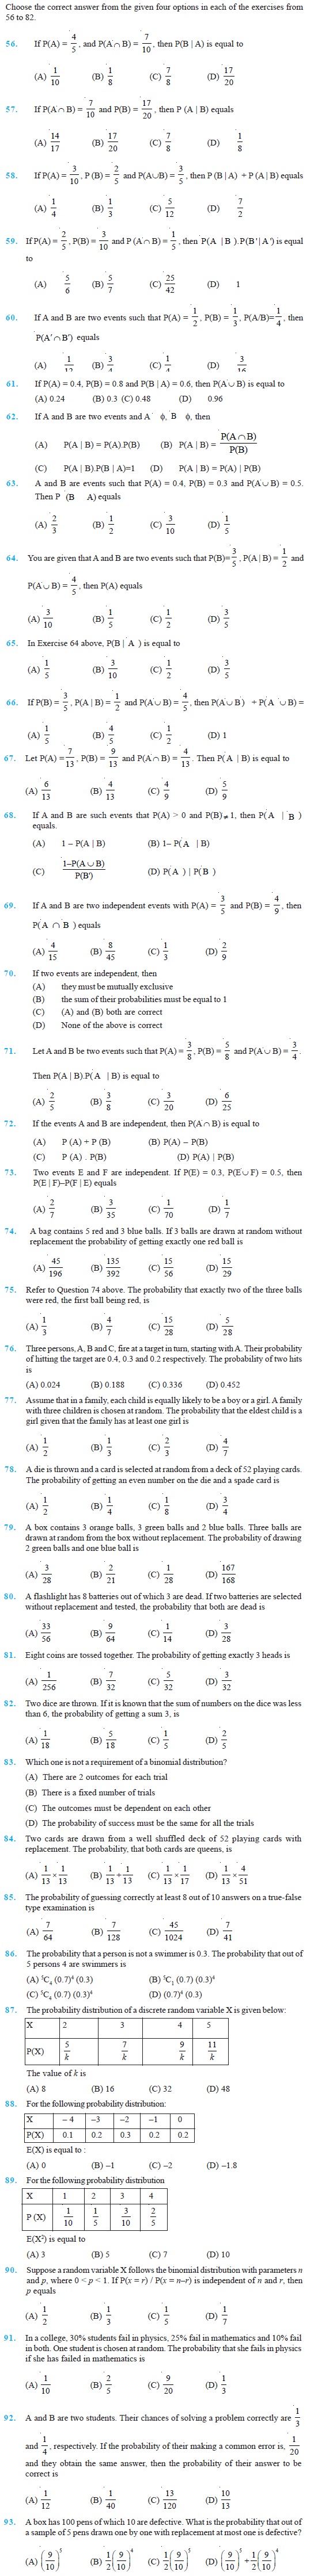 Class 12 Important Questions for Maths - Probability